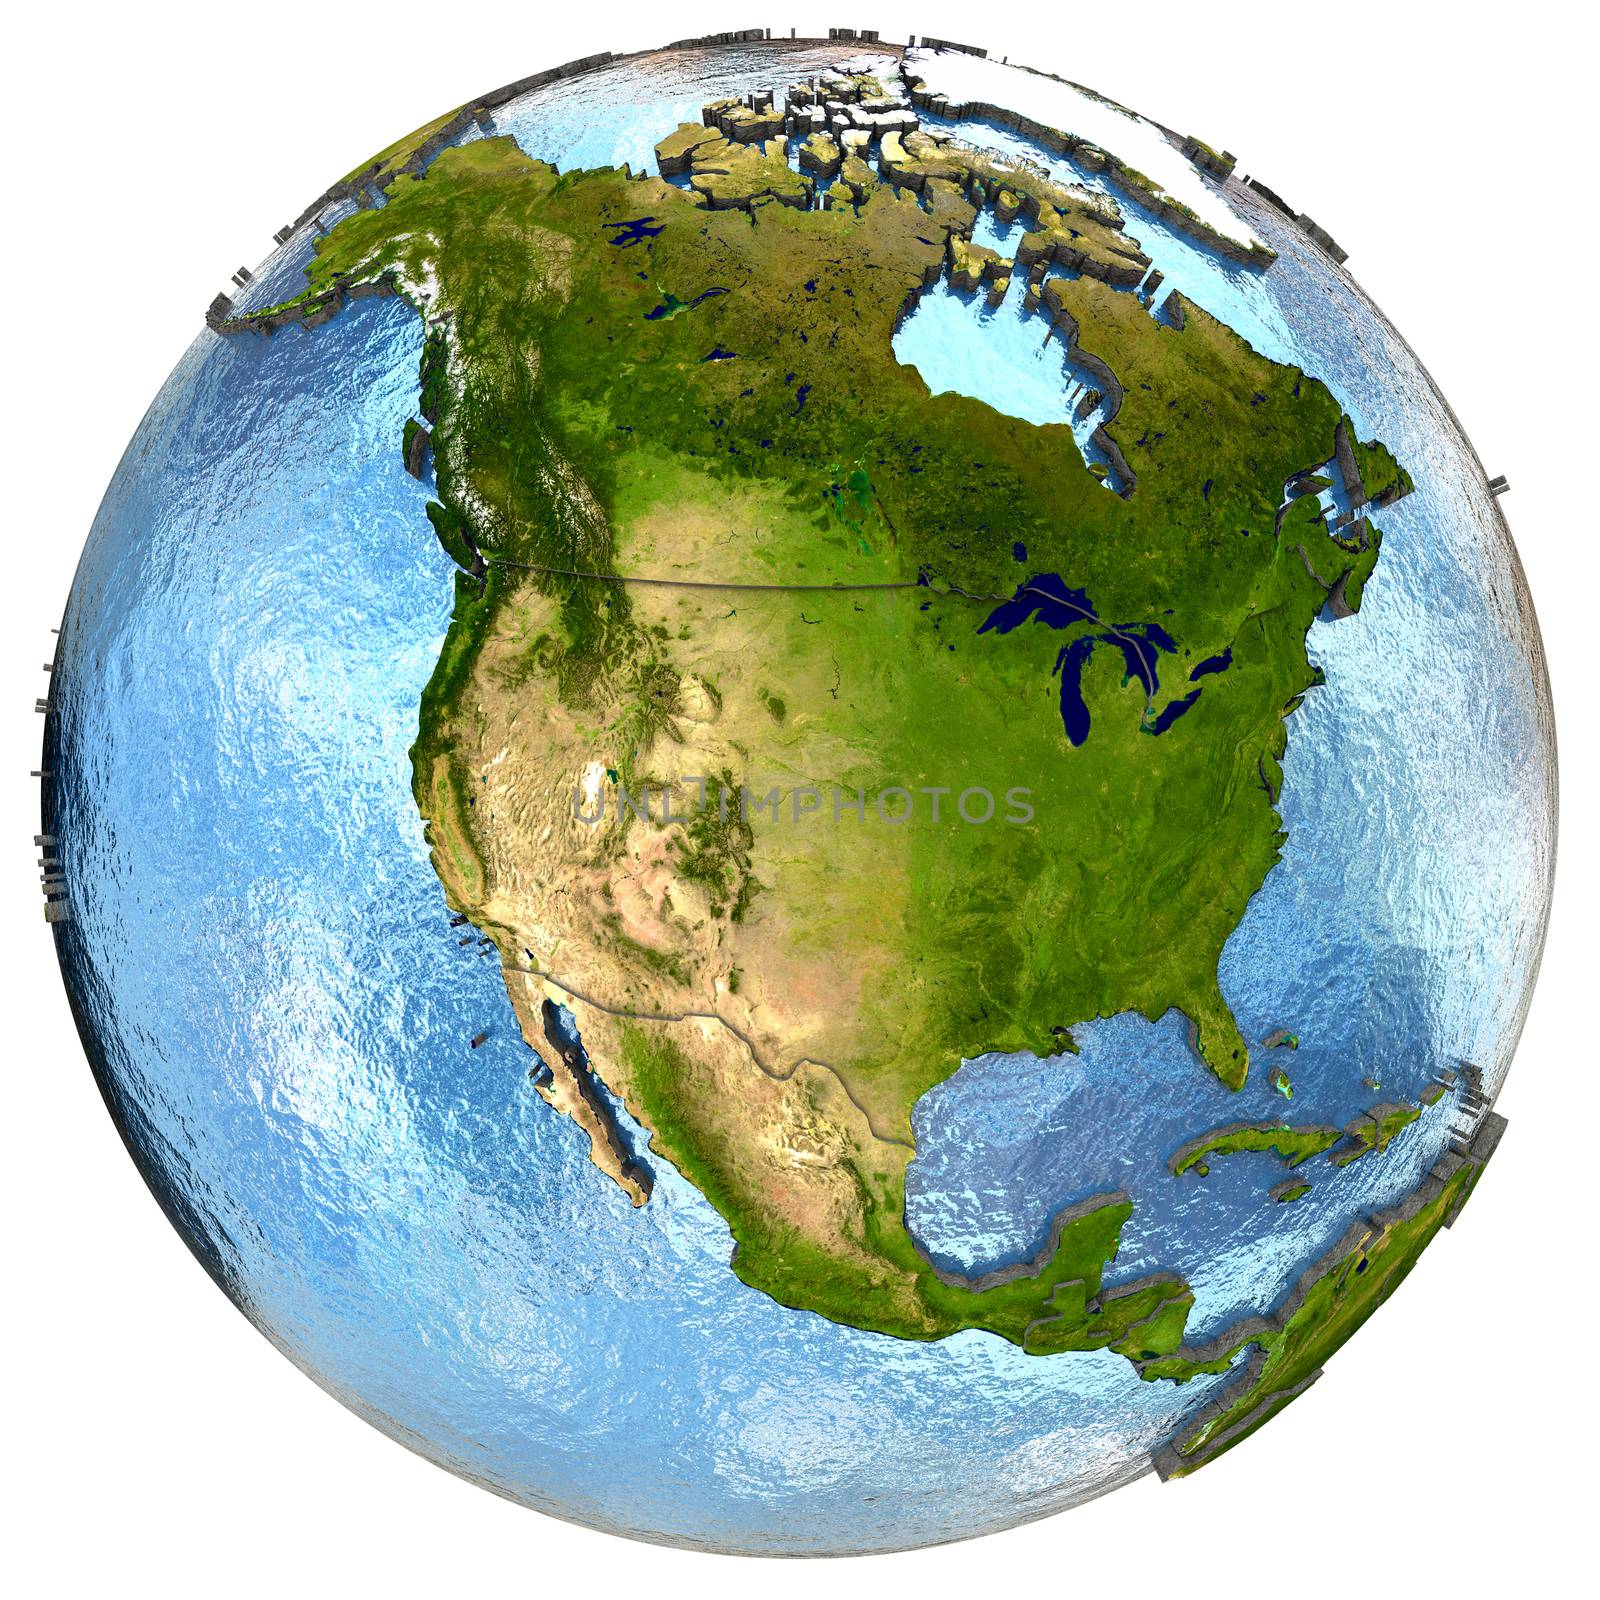 North America on Earth by Harvepino